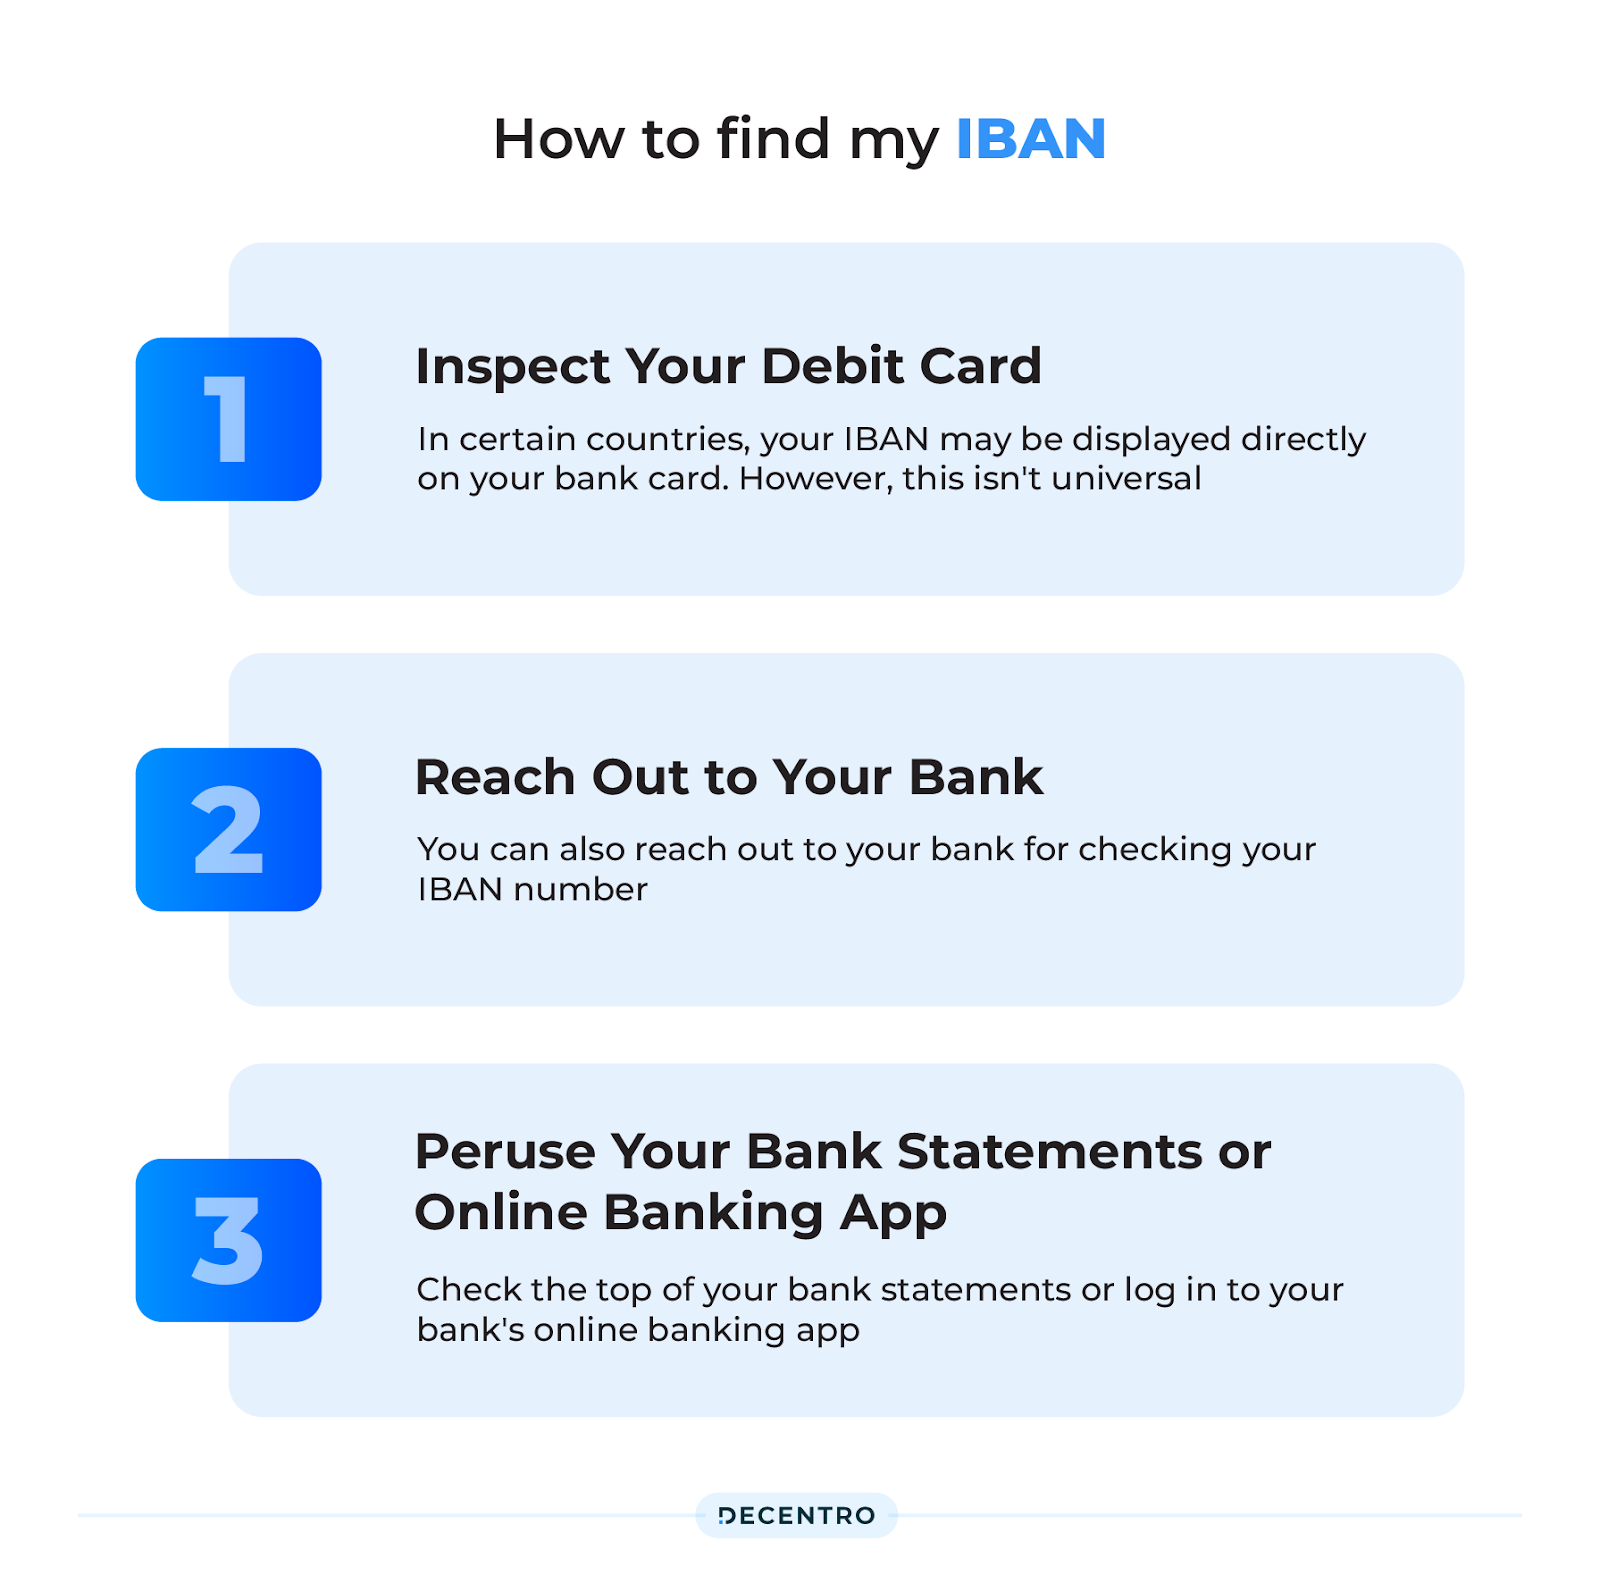 How do I find my IBAN Number